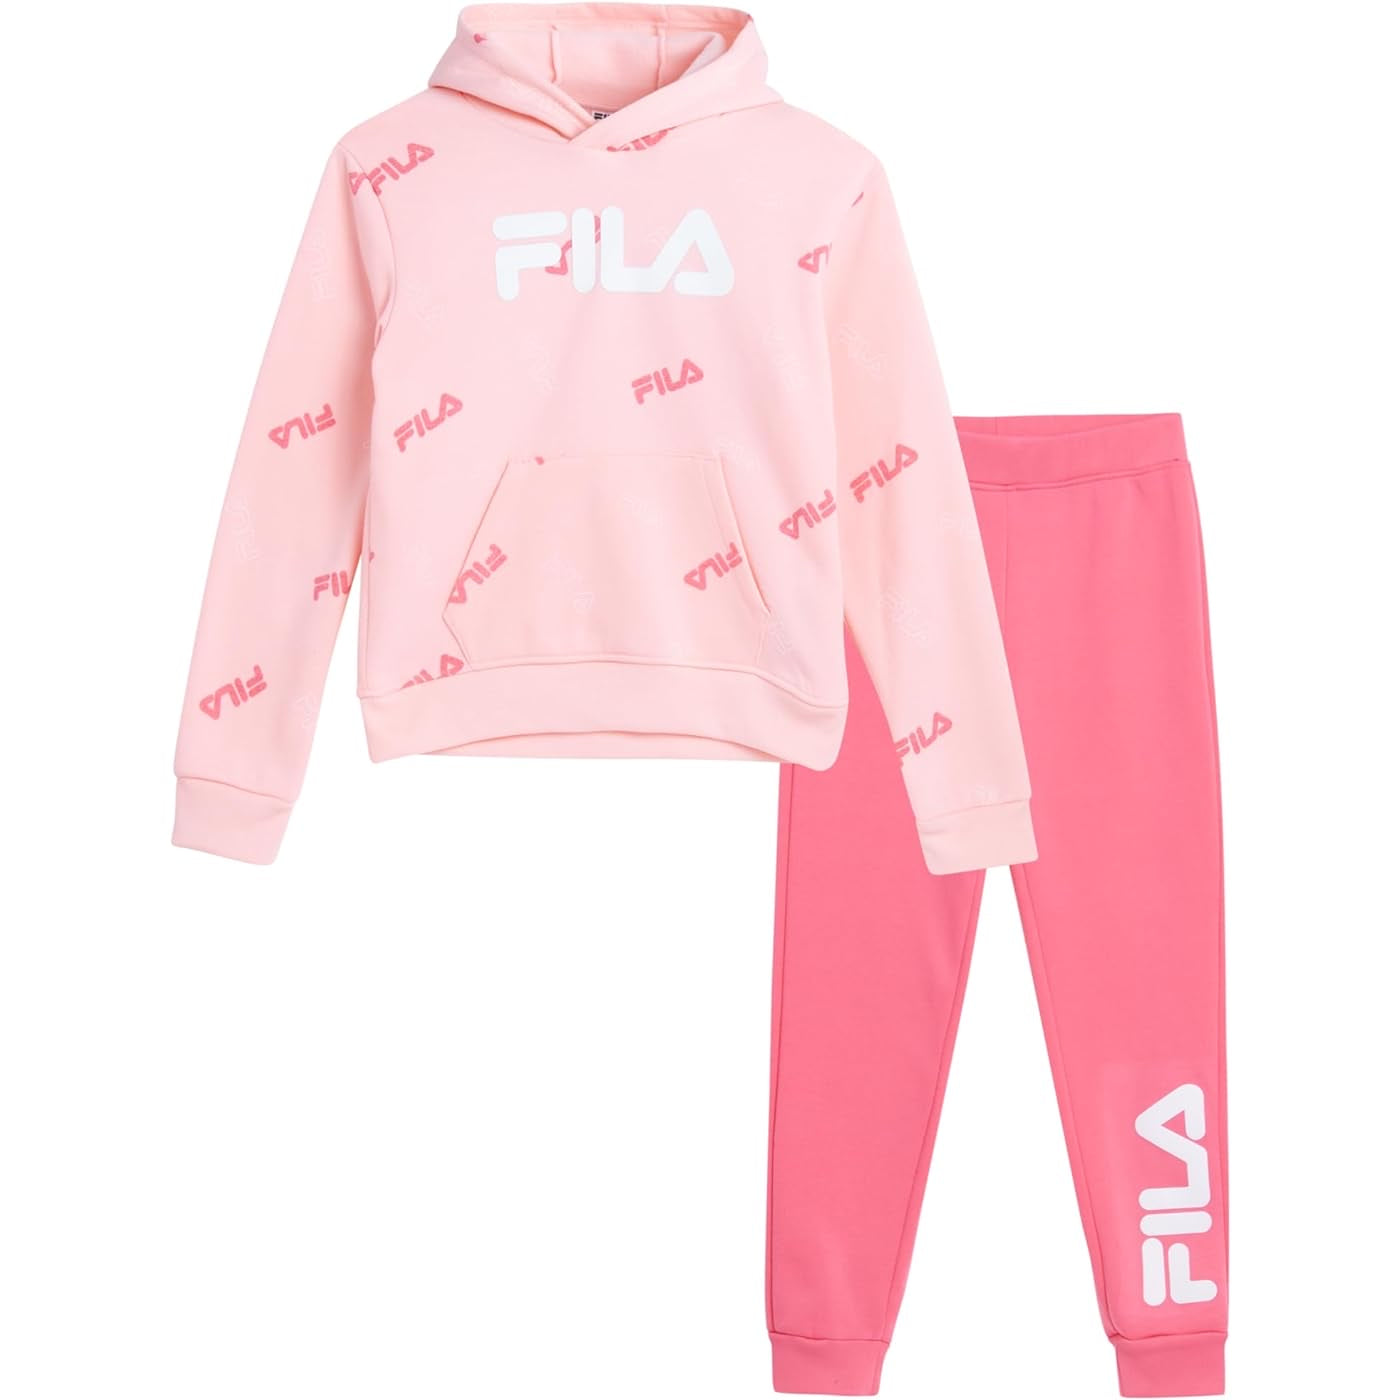 Fila outfit